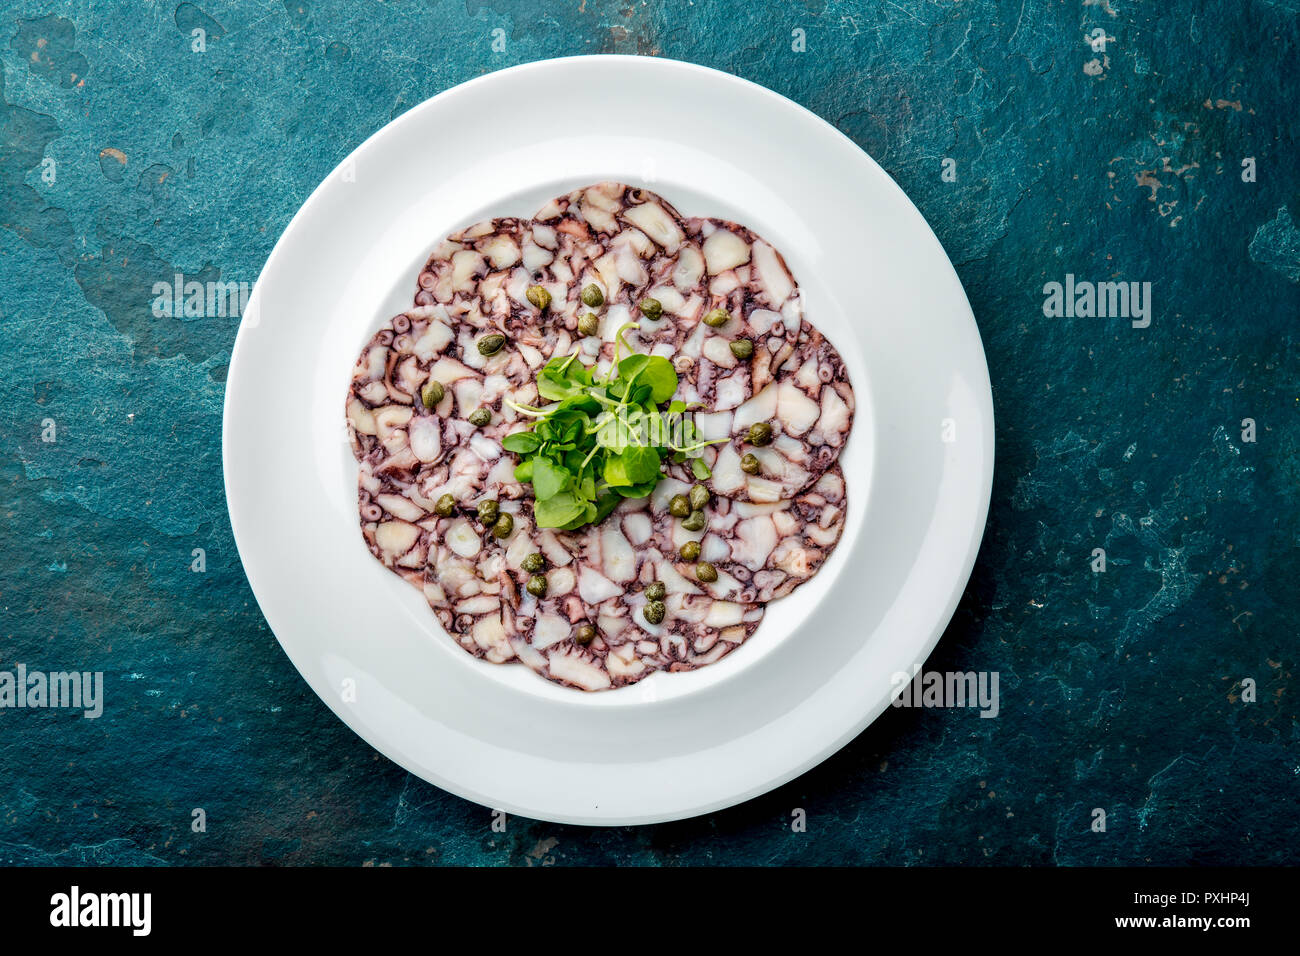 OCTOPUS CARPACCIO. Seafood Raw octopus slices with olive oil, lemon and capers on white plate. Top view. blue background Stock Photo